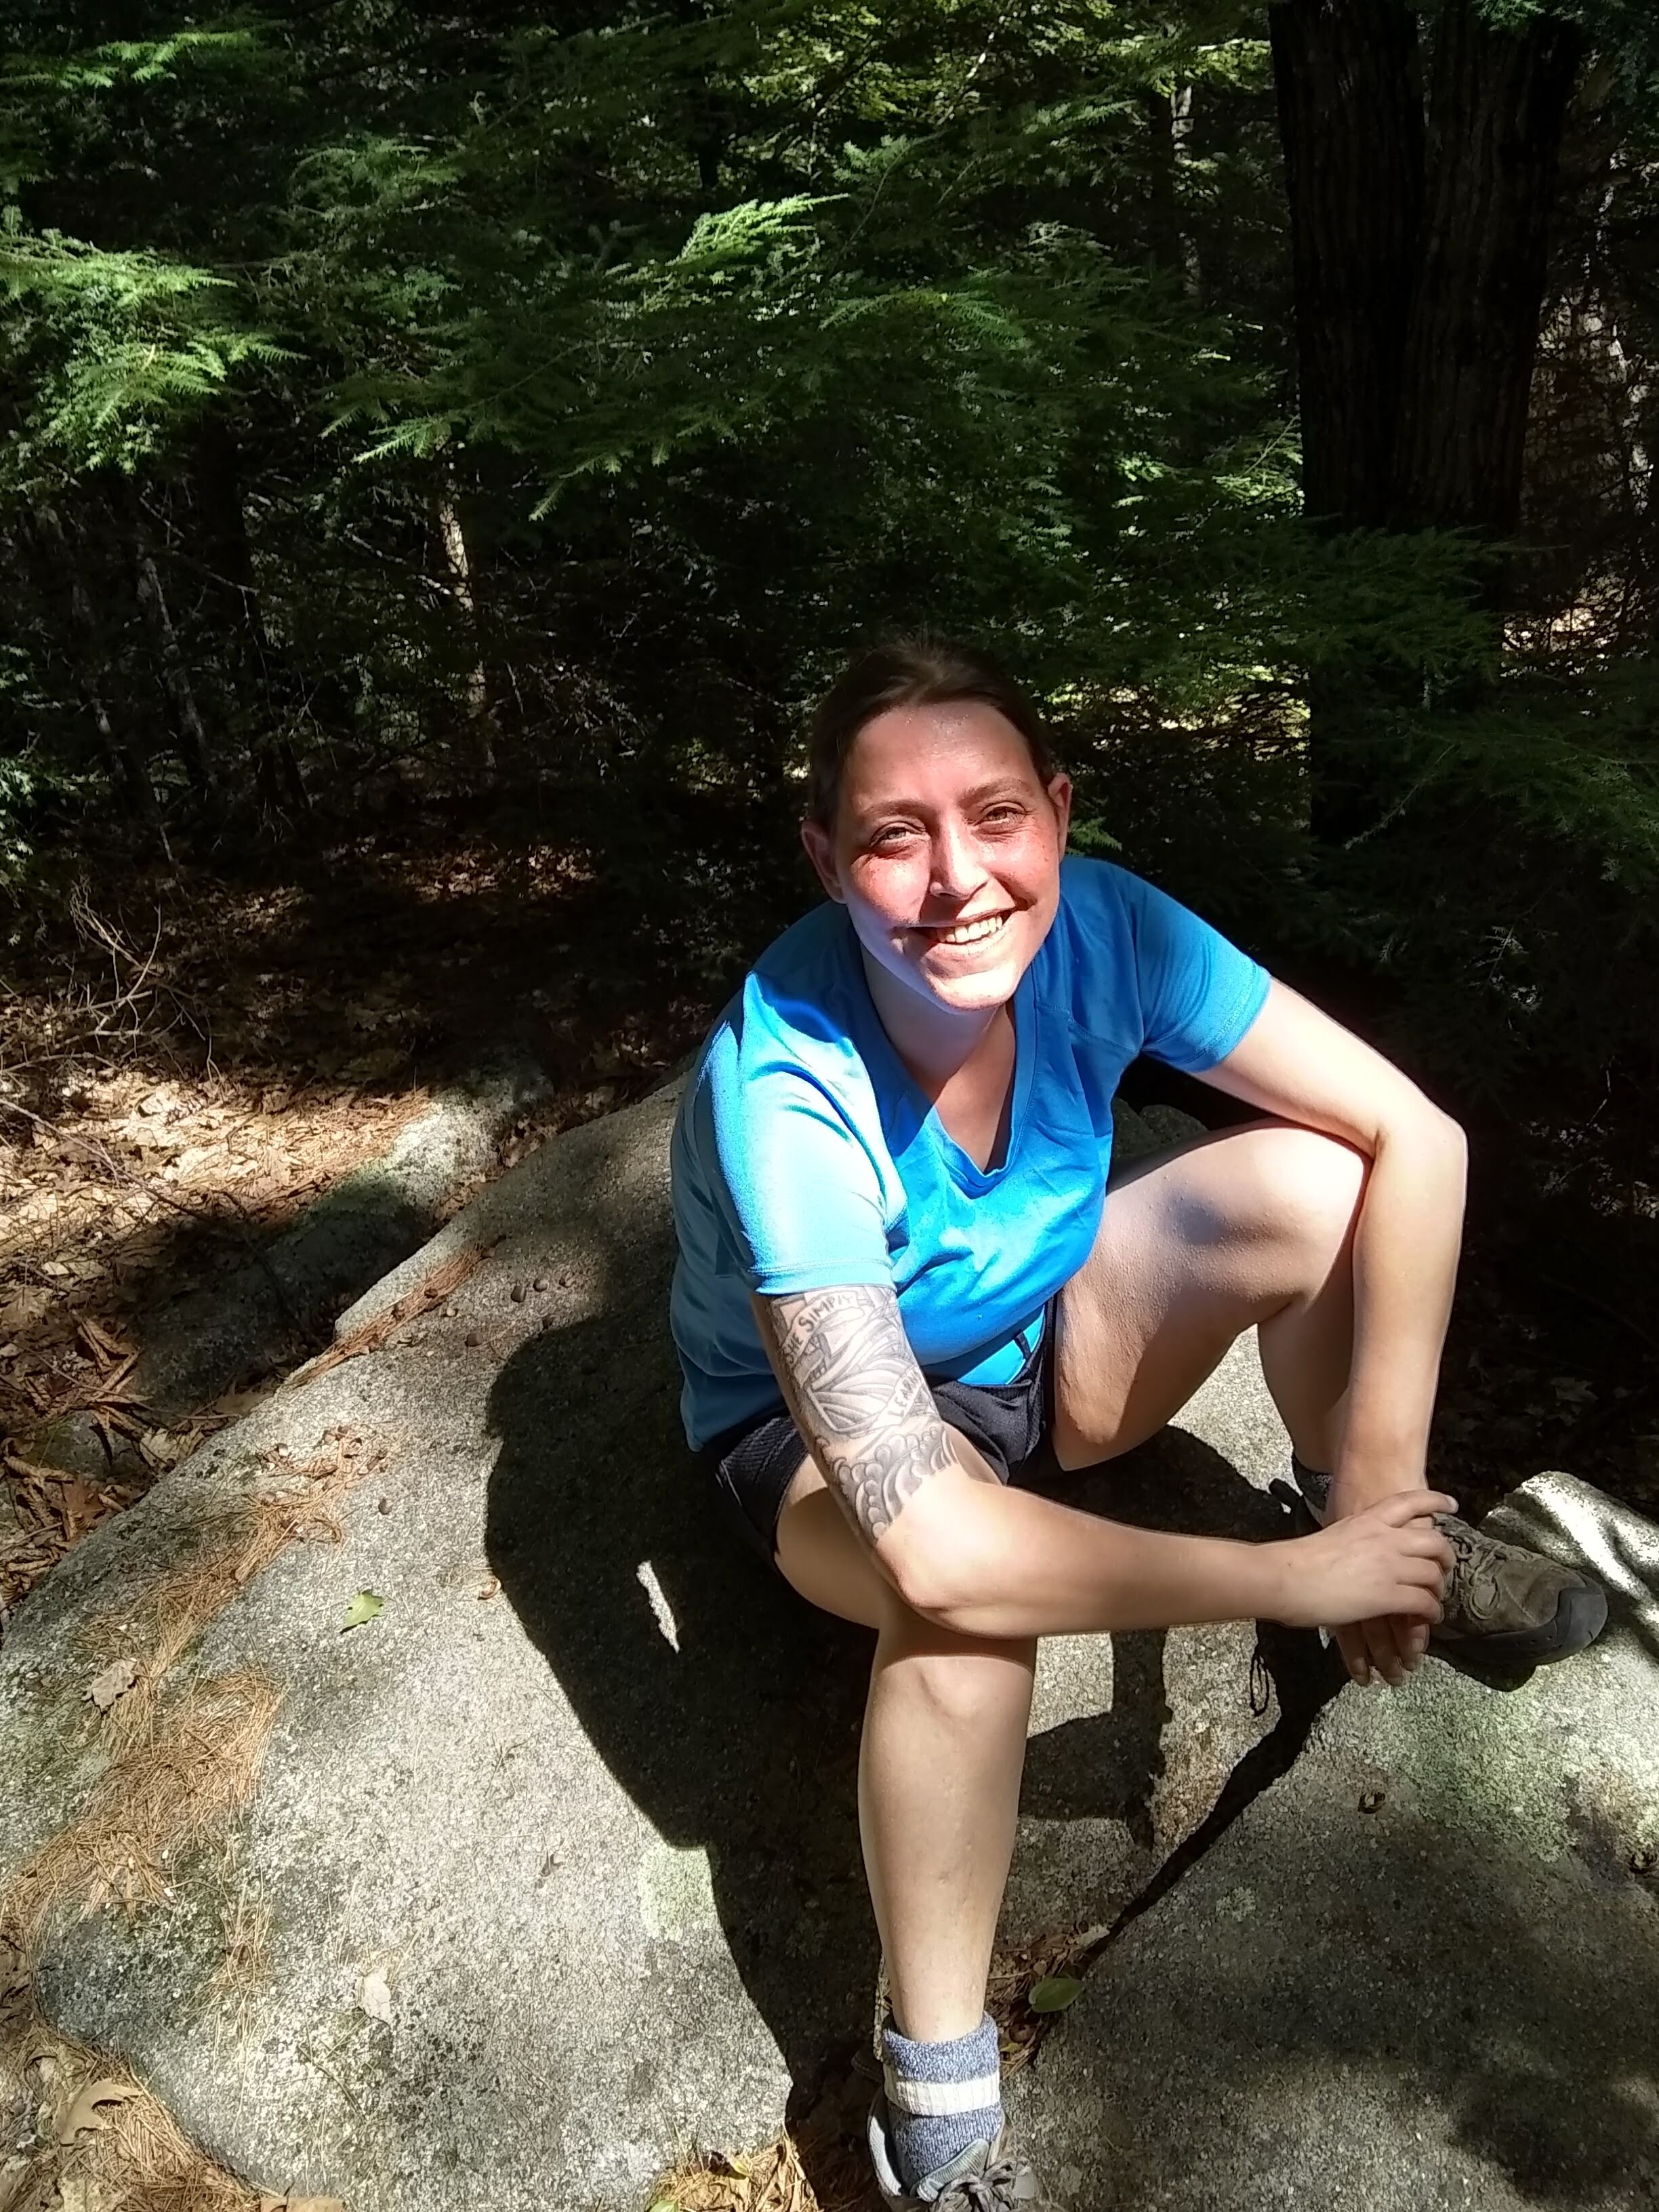 The blog authorized, a woman with brown hair sitting on a rock in the woods.